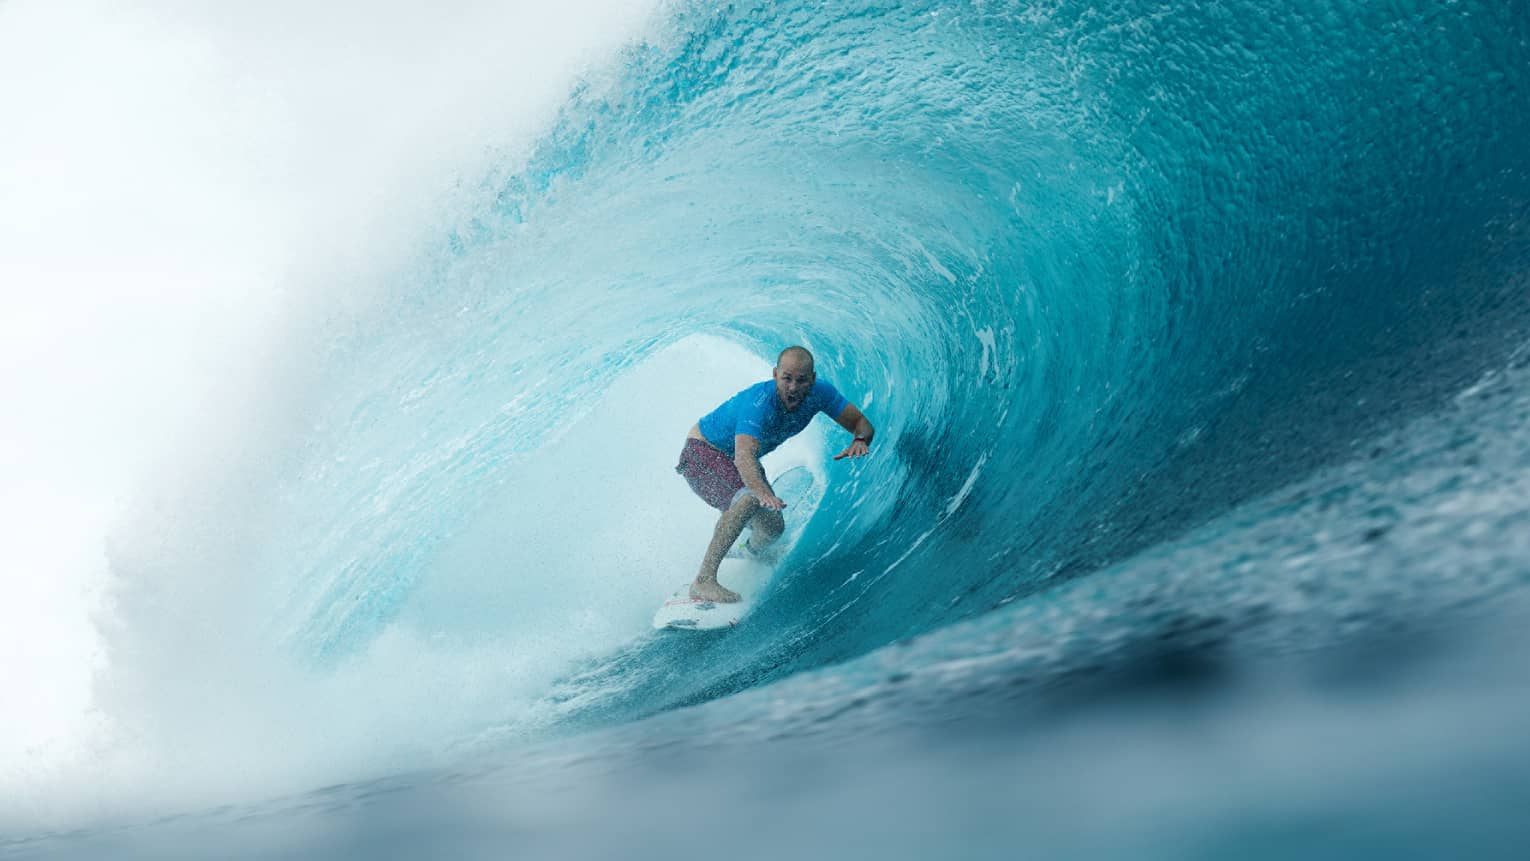 Man on surfboard surfs along large waves in remote Outer Atolls